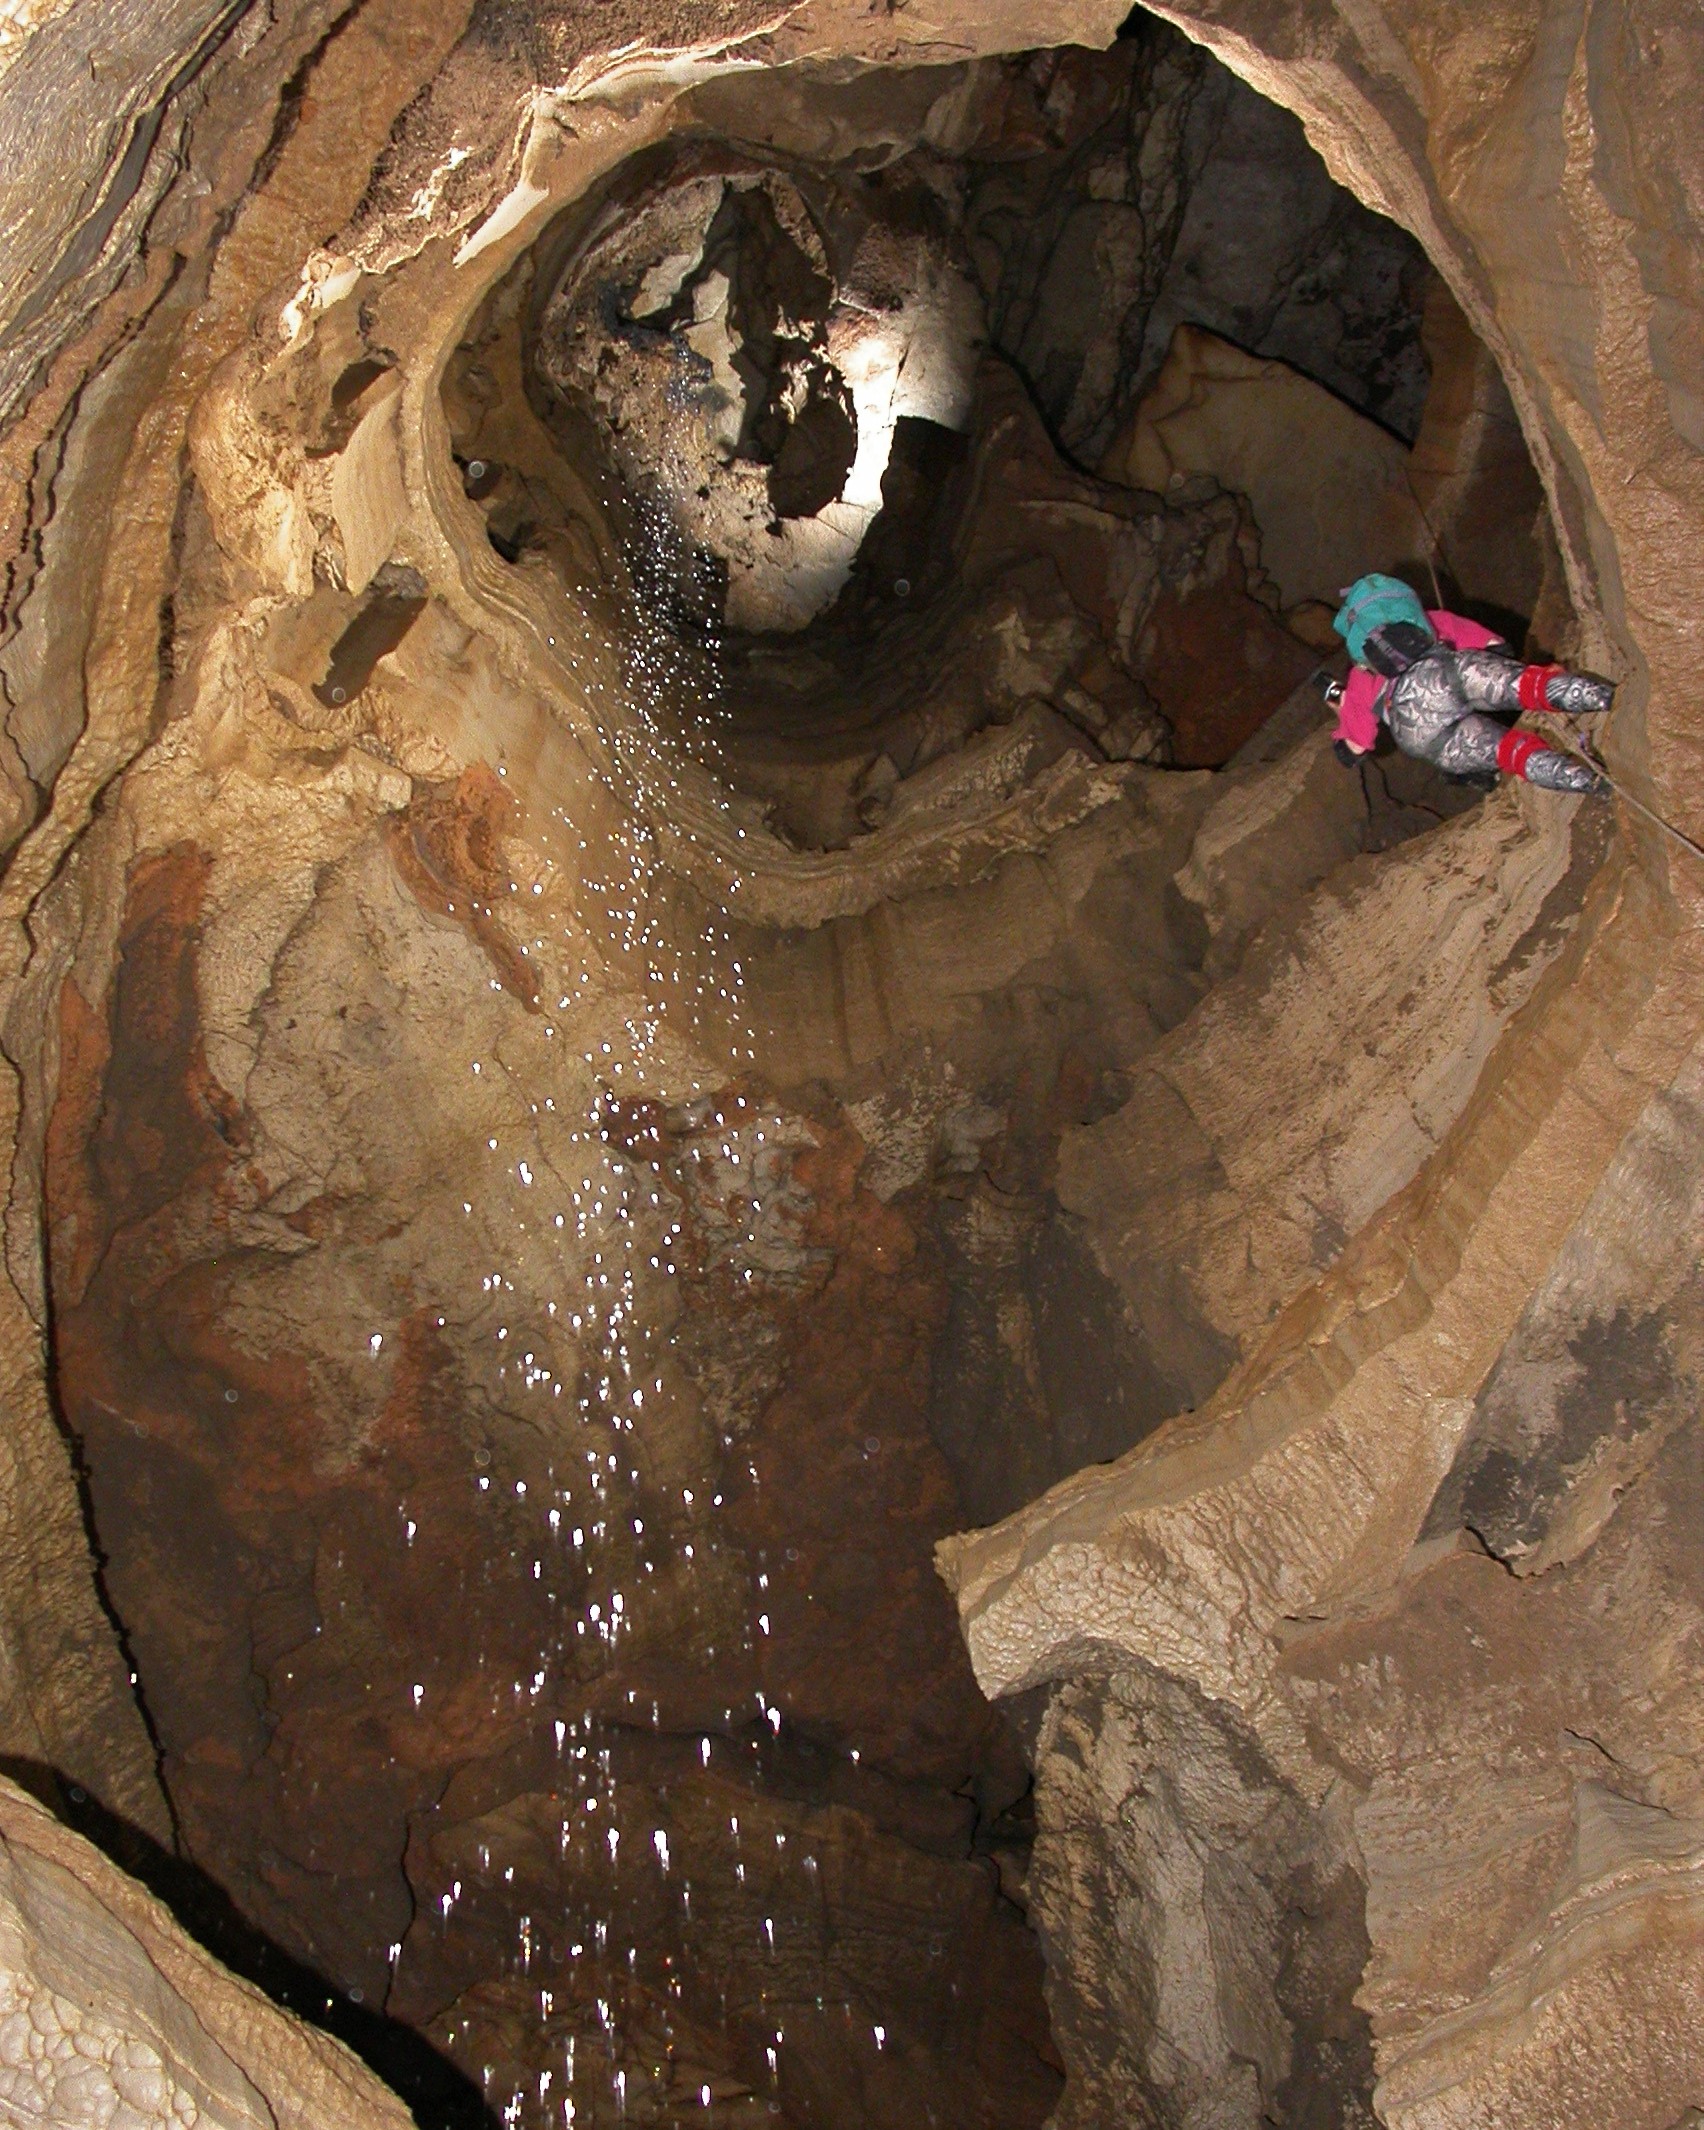 A person holds herself up on a long rope in a rocky, jagged cave with water streaming next to her.